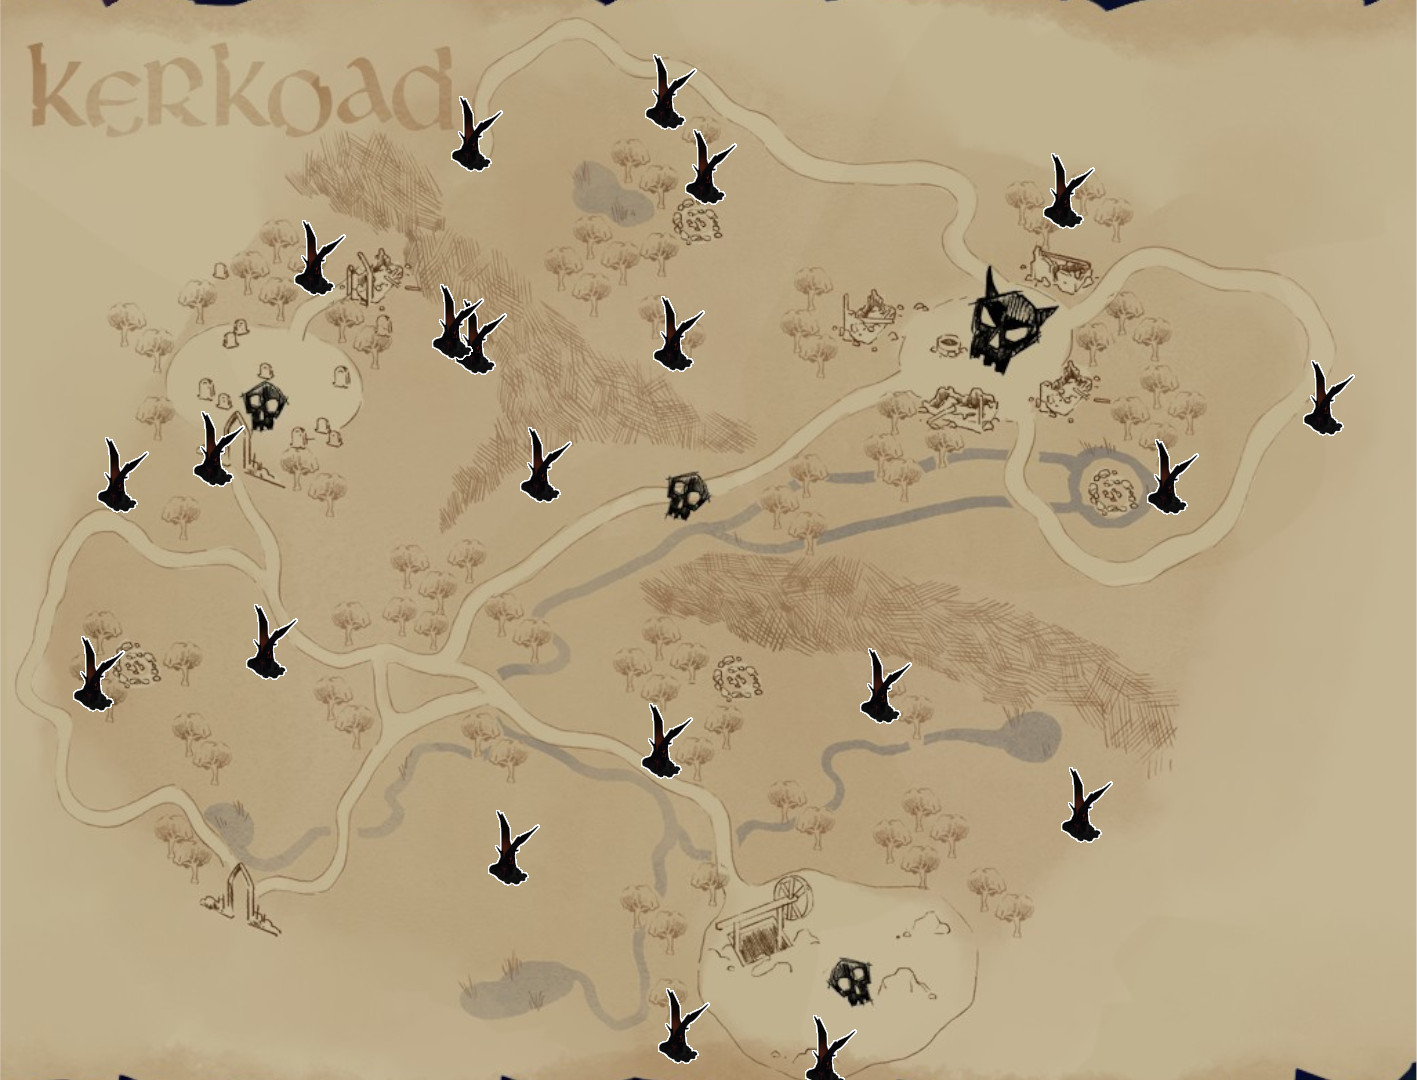 An Ankou - All Resources Available and Map Guide - Specialized resource maps - FEE206F